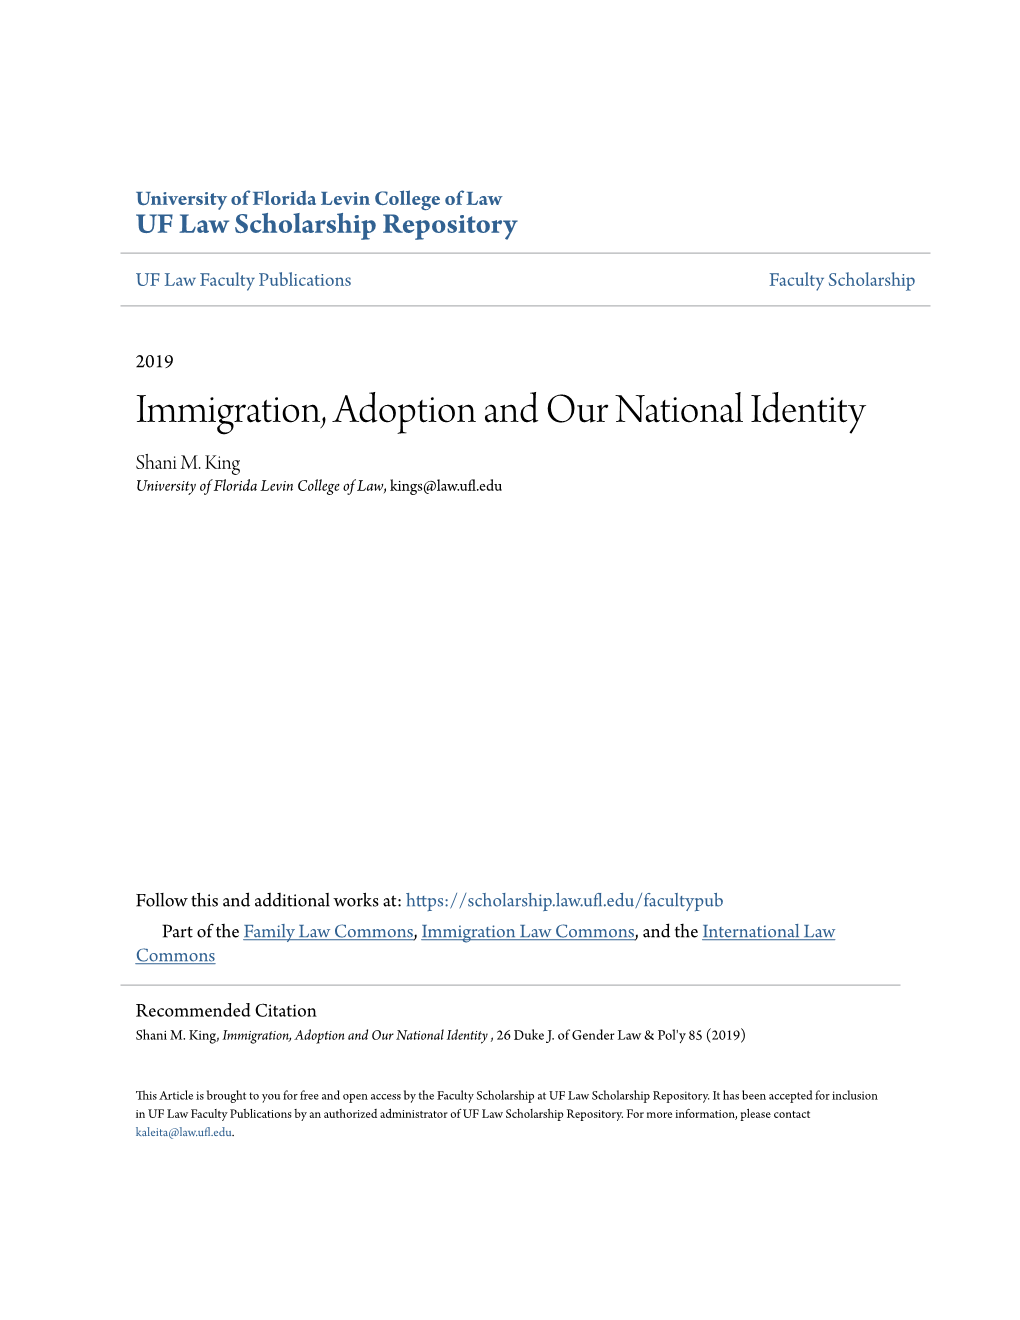 Immigration, Adoption and Our National Identity Shani M